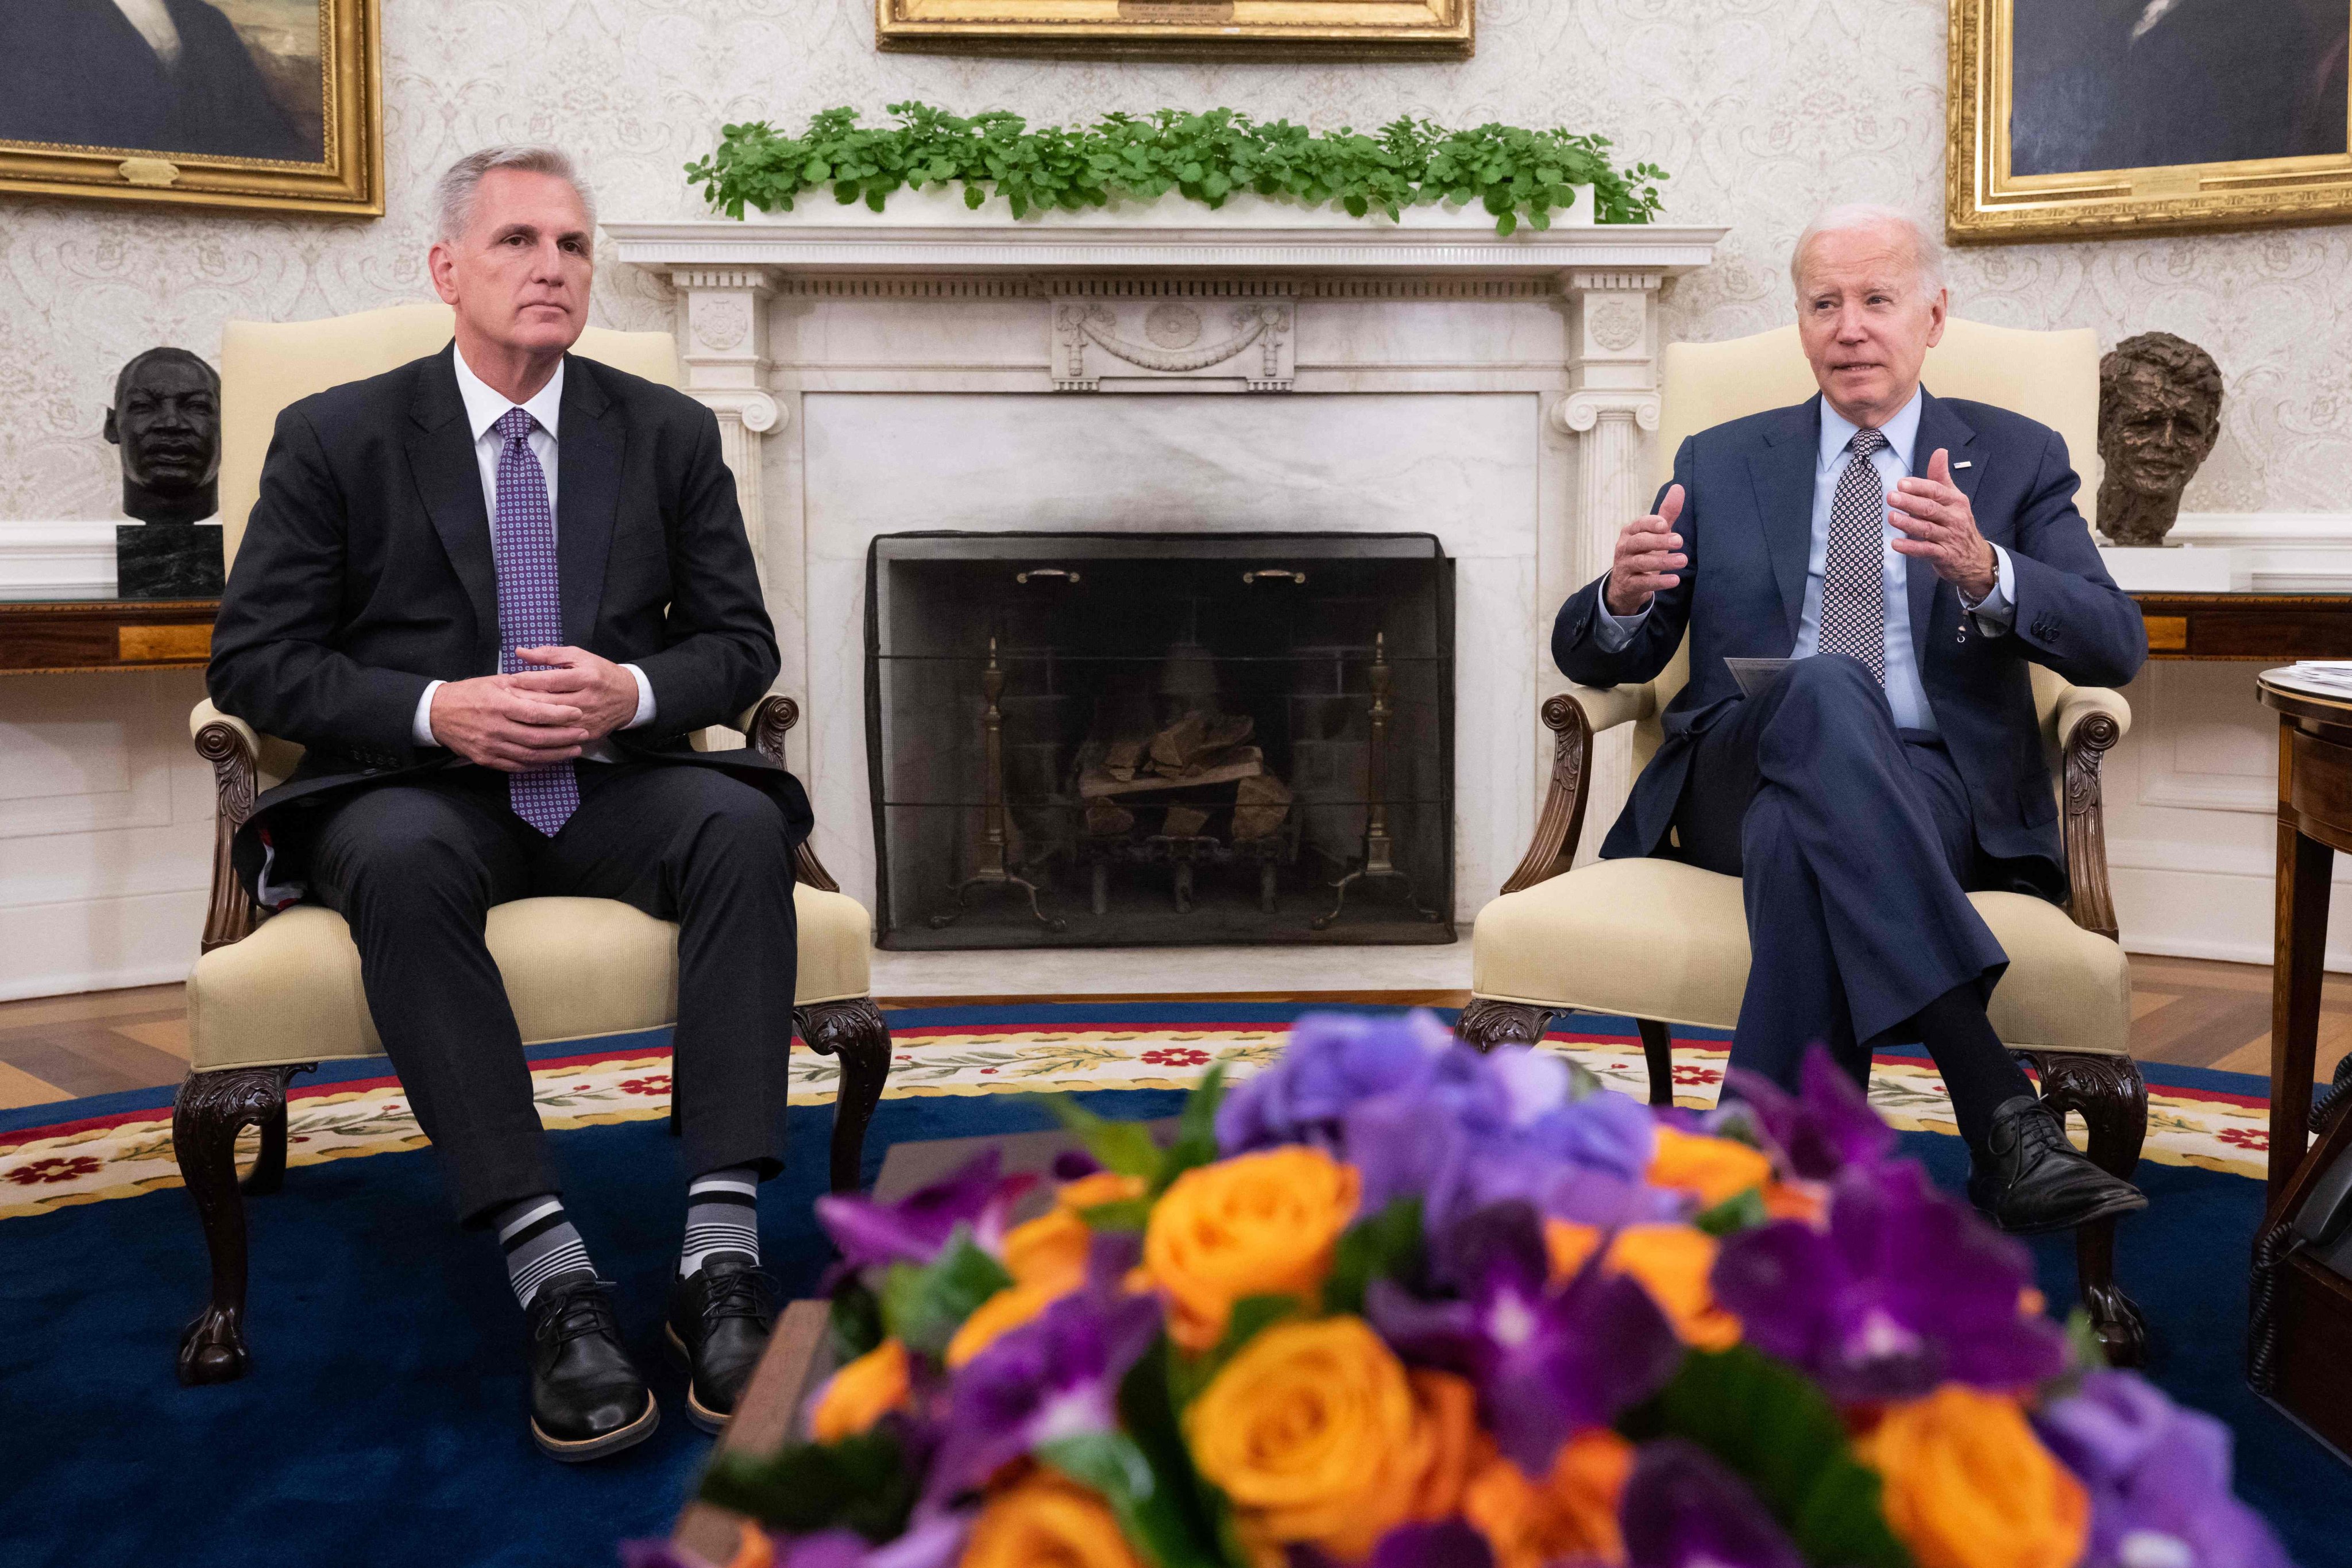 US House Speaker Kevin McCarthy (left) looks on as President Joe Biden speaks during a meeting on the debt ceiling in the Oval Office of the White House in Washington on May 22. Photo: AFP